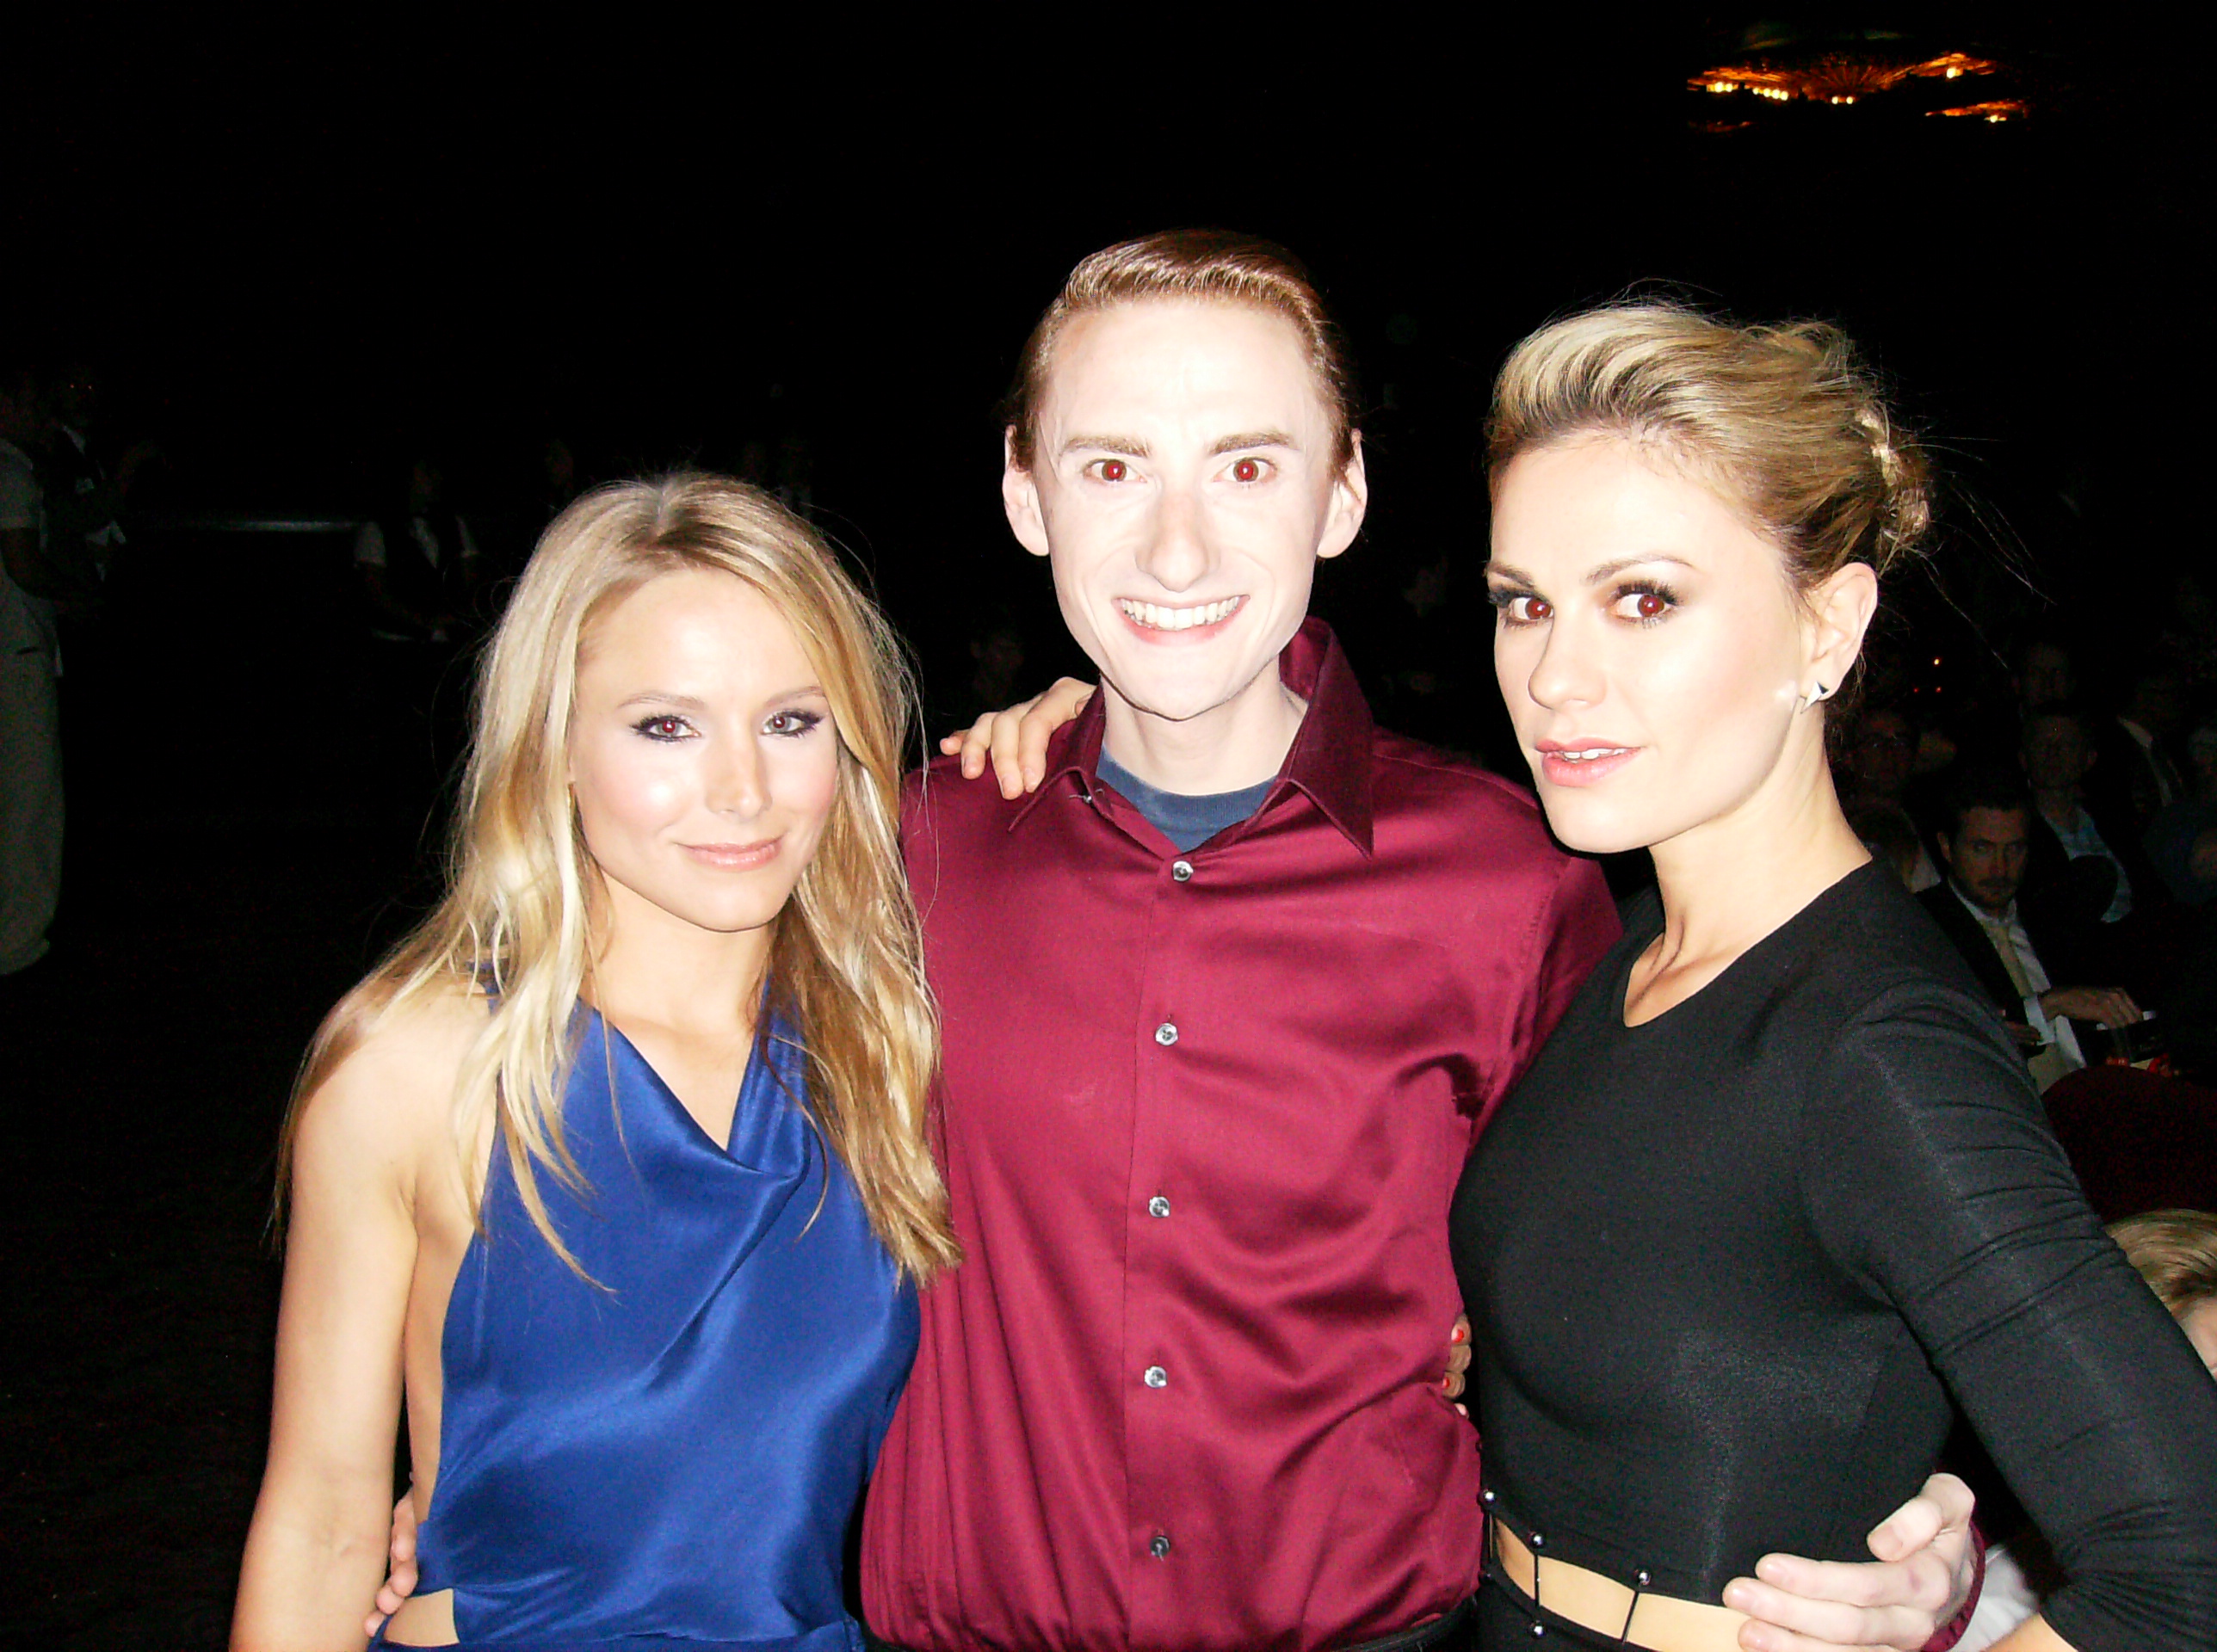 Kristen Bell, Joshua Patrick Dudley and Anna Paquin at the Scream 4 Premiere in 2011